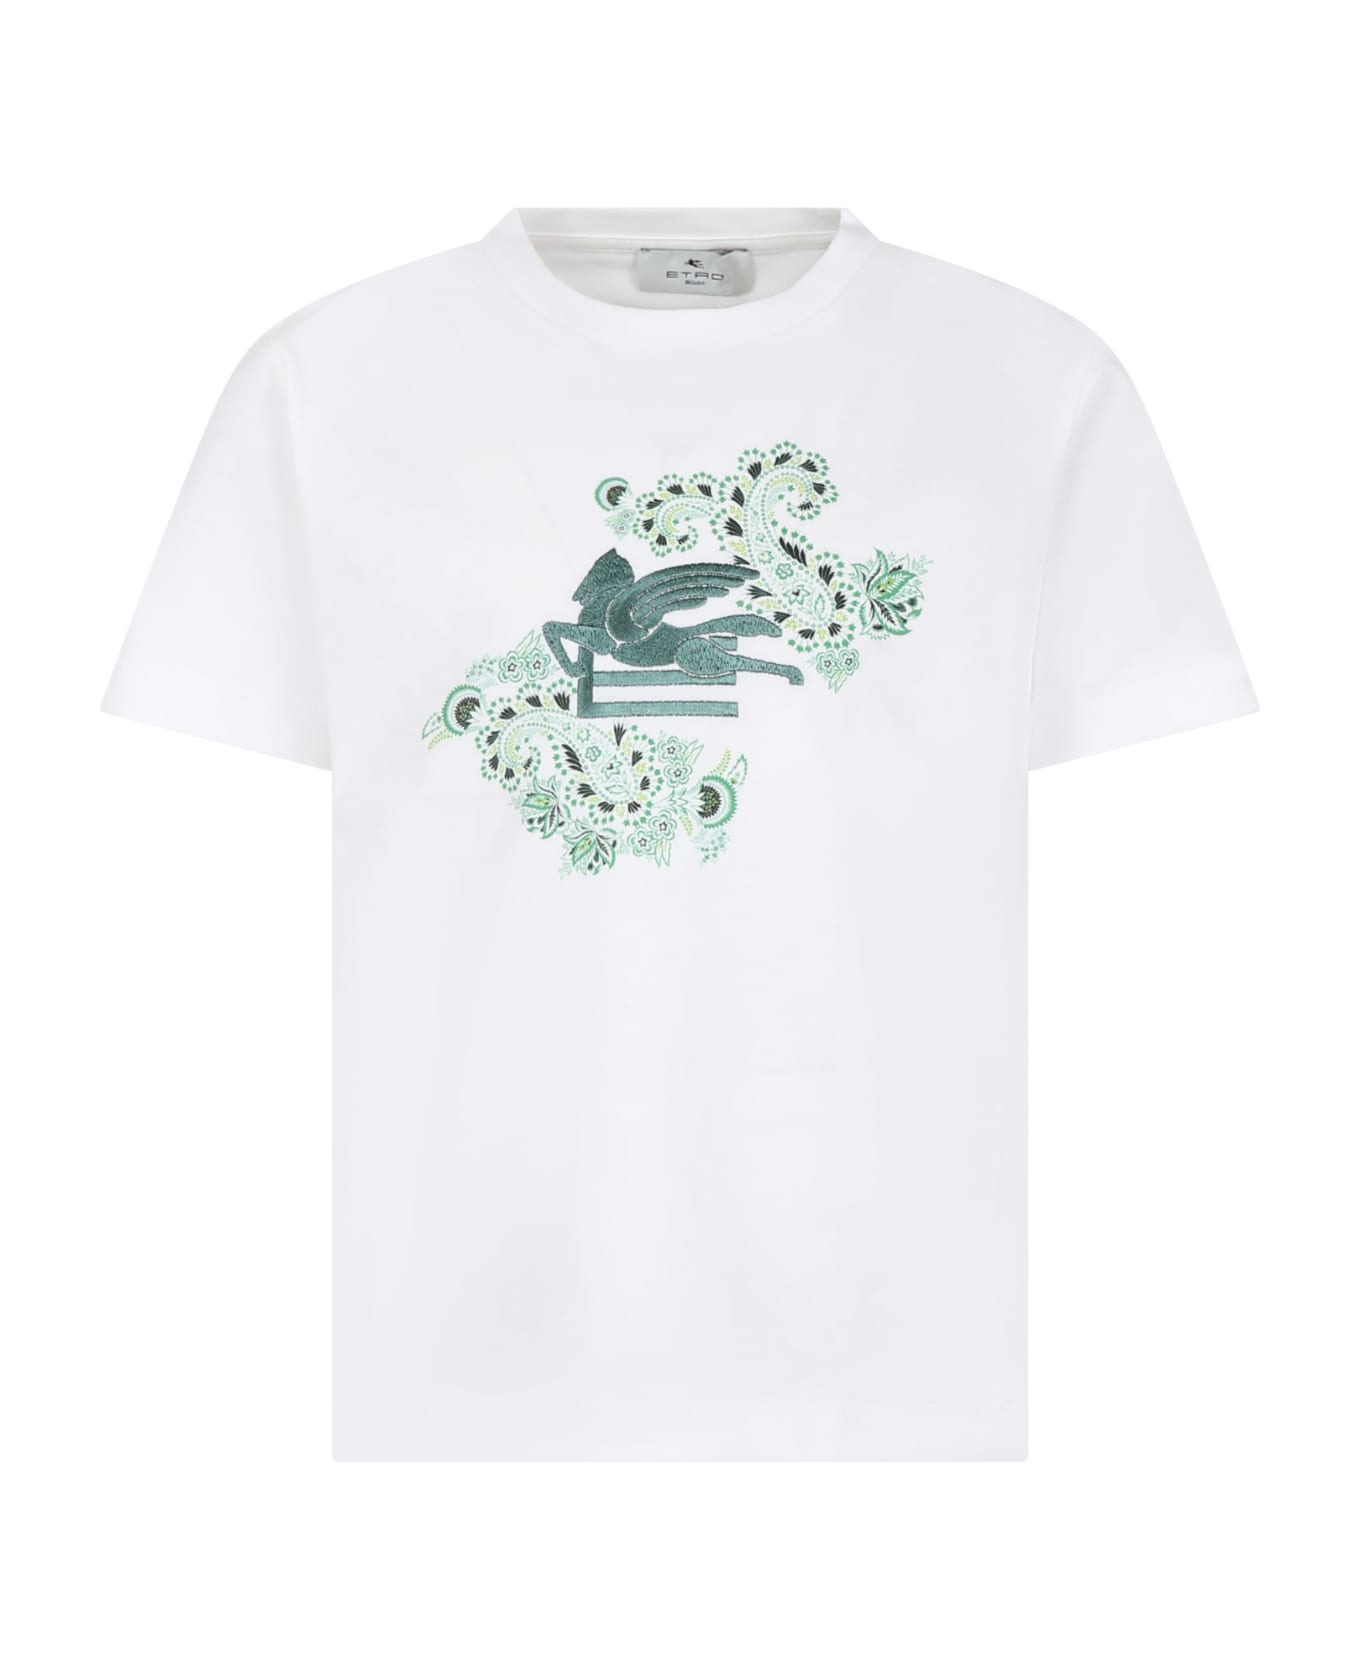 Etro White T-shirt For Kids With Logo And Paisley Pattern - IVORY